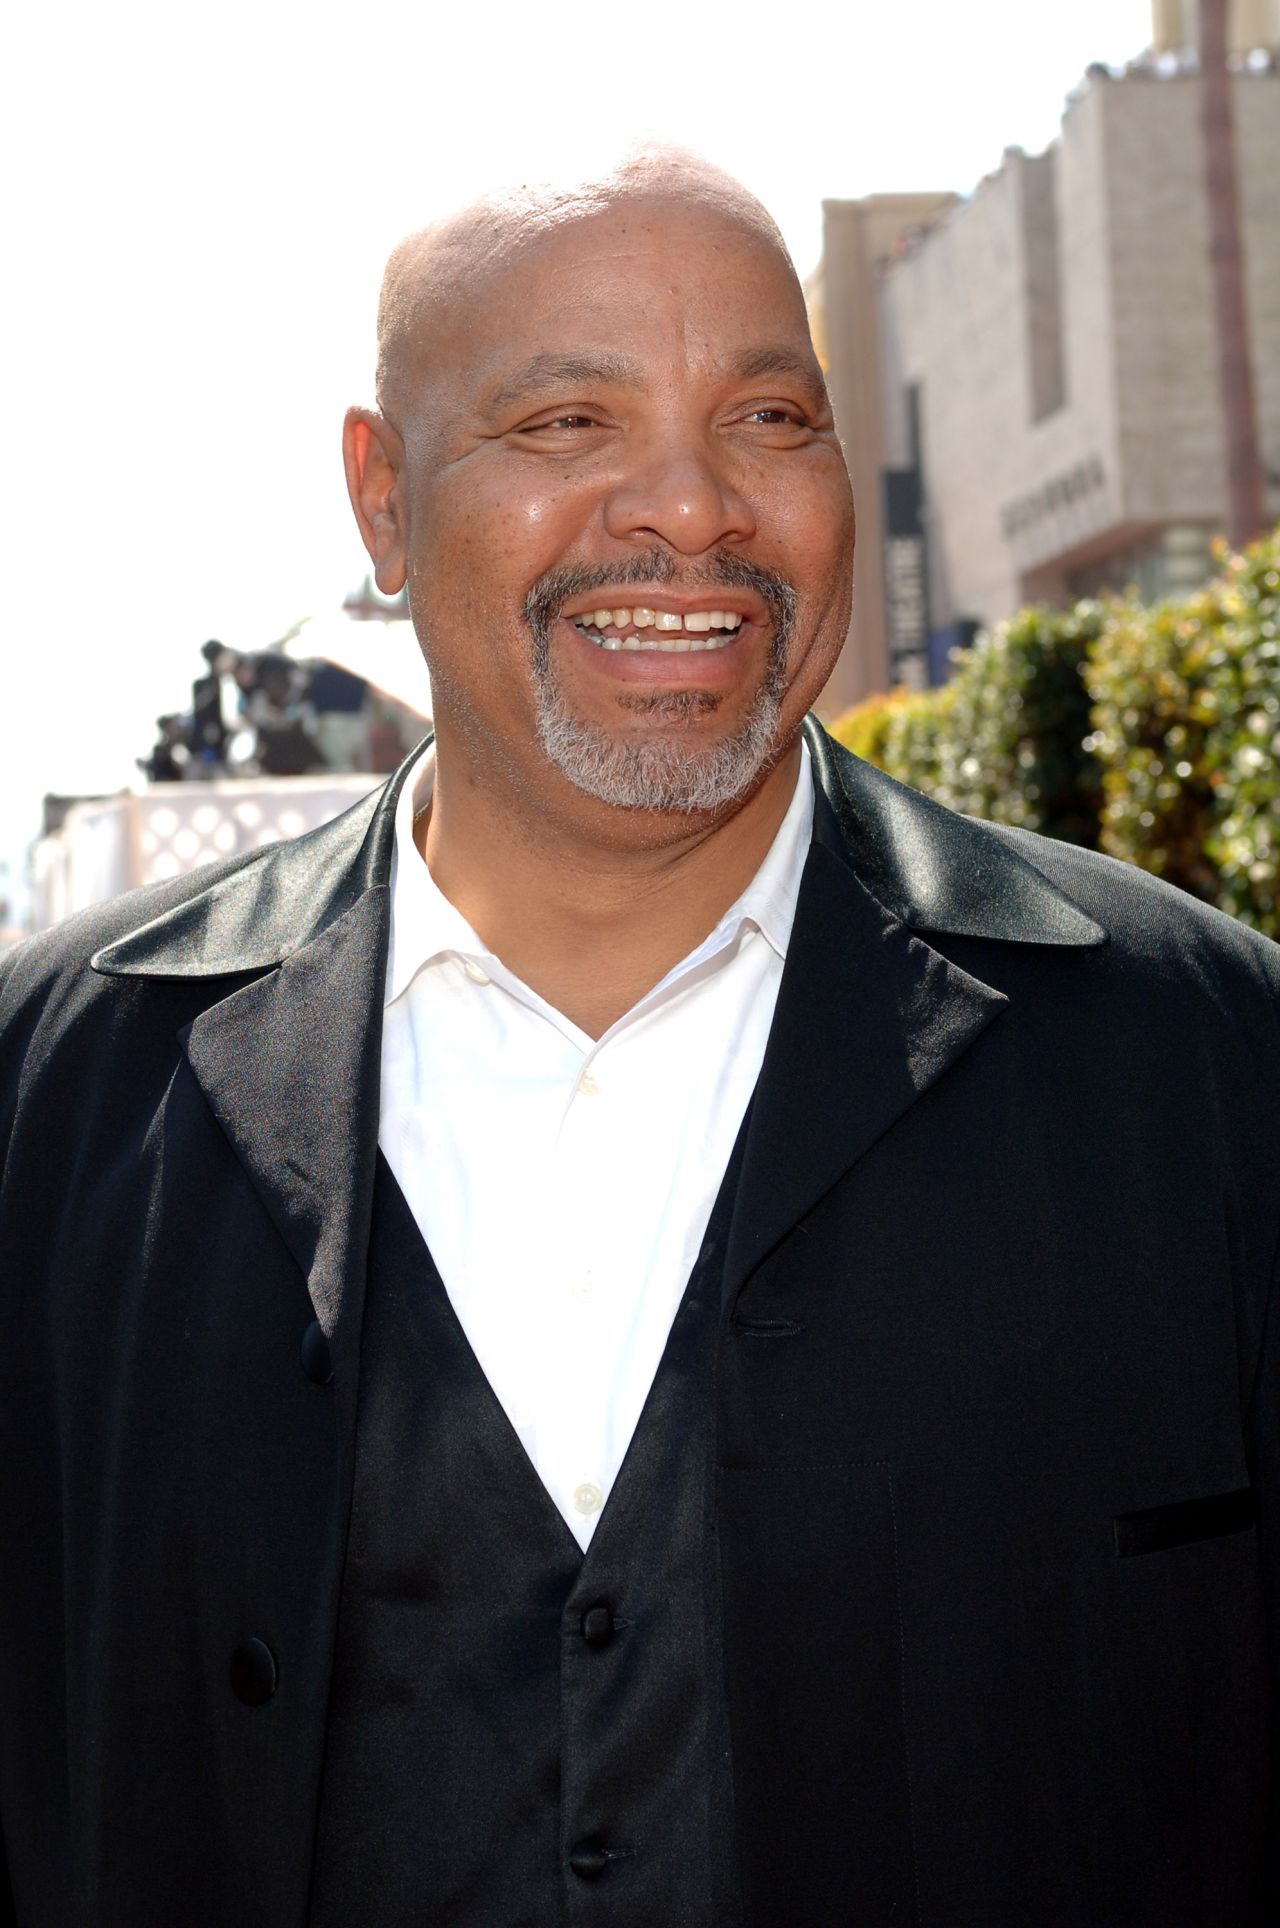 <a href="http://www.cnn.com/2014/01/01/showbiz/celebrity-news-gossip/james-avery-obit/" target="_blank">James Avery</a>, who played Philip Banks on the TV show "The Fresh Prince of Bel-Air," died on December 31 at the age of 68, his publicist confirmed.